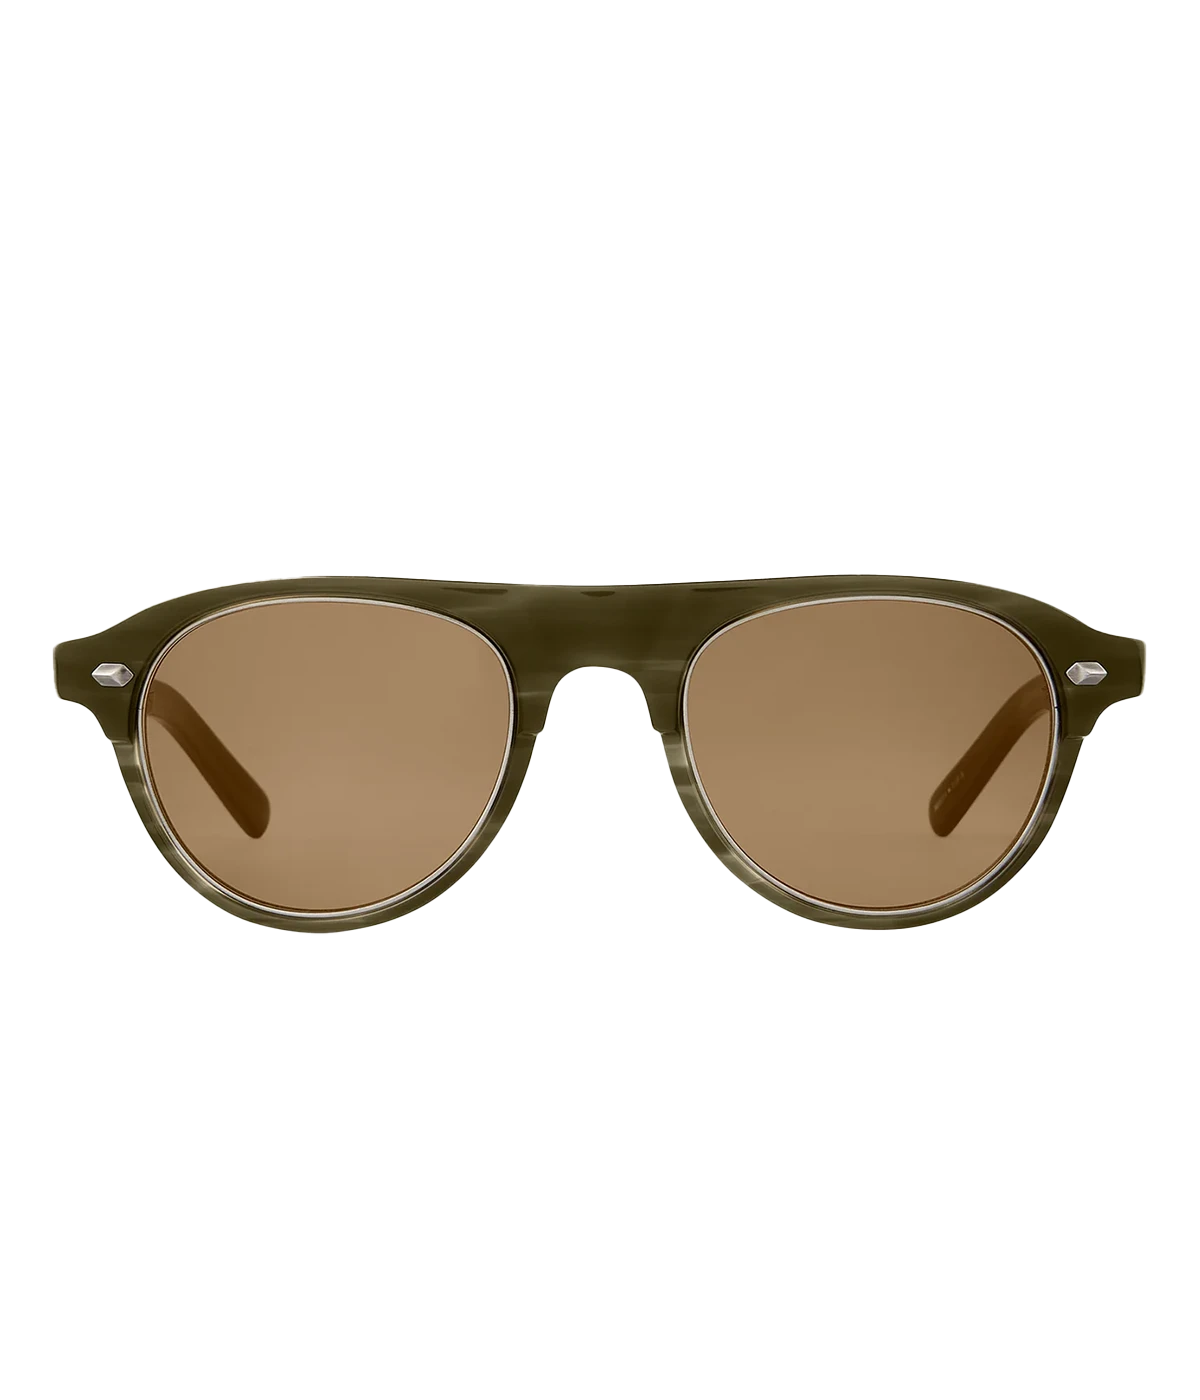 Green aviator style sunglasses in brown. Handcrafted in Japan. 